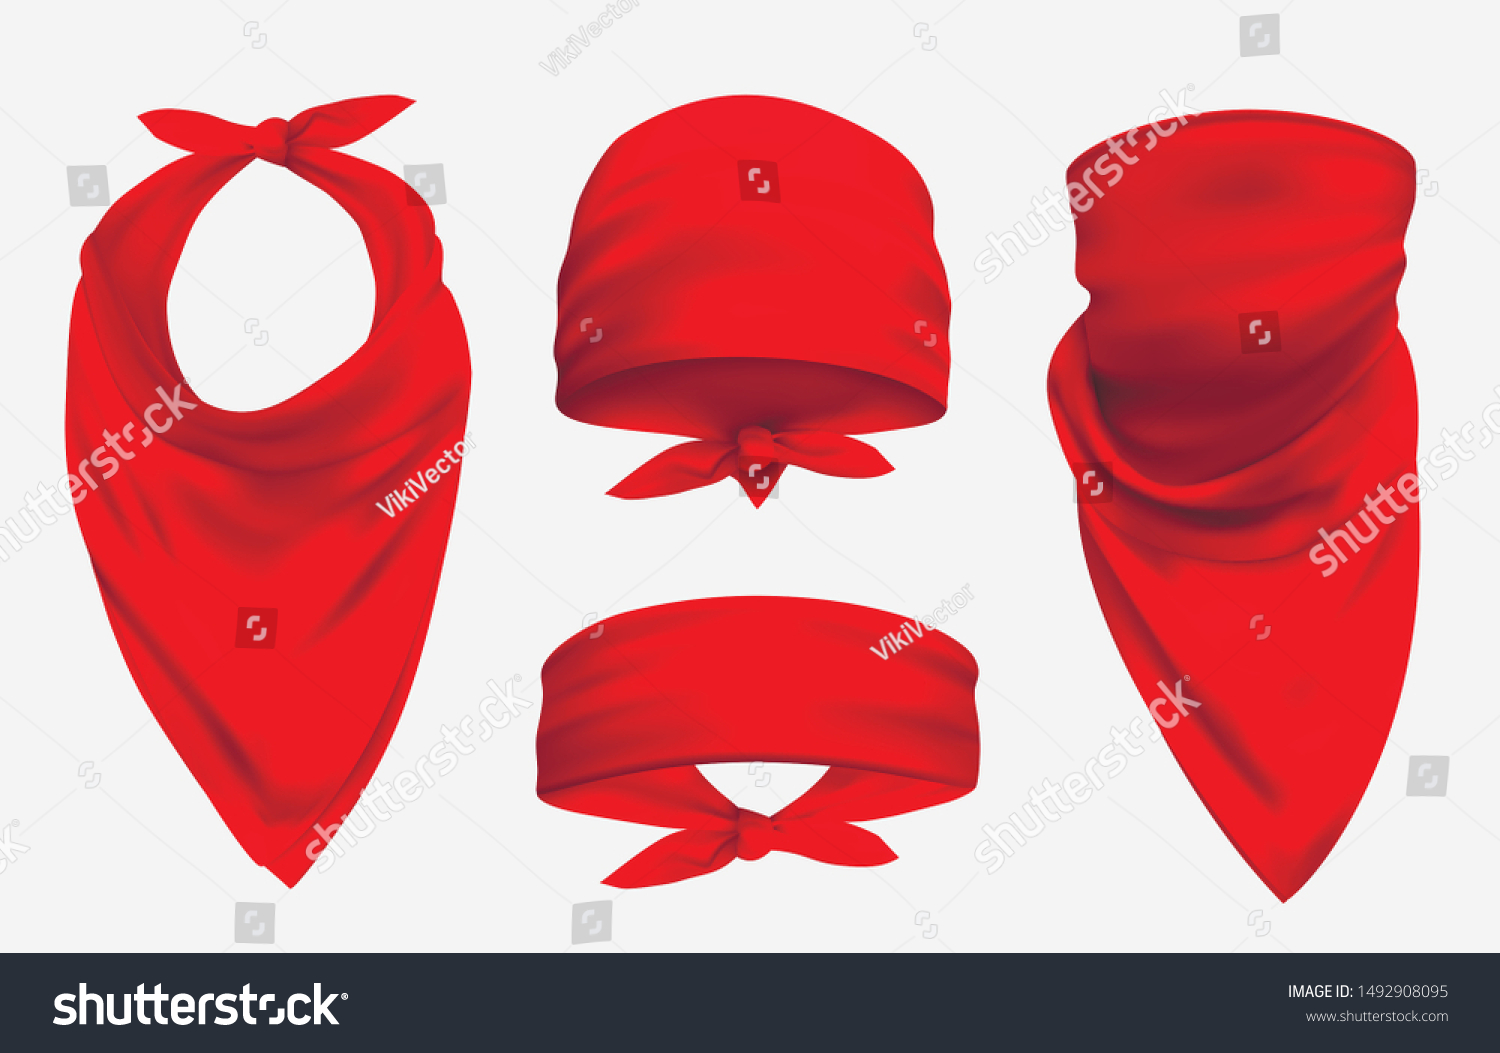 SVG of Red bandana realistic 3d accessory illustrations set. Biker and cowboy clothes for protecting face isolated on white background. Fashionable silk headband, neckerchief and forehead. Unisex clothing svg